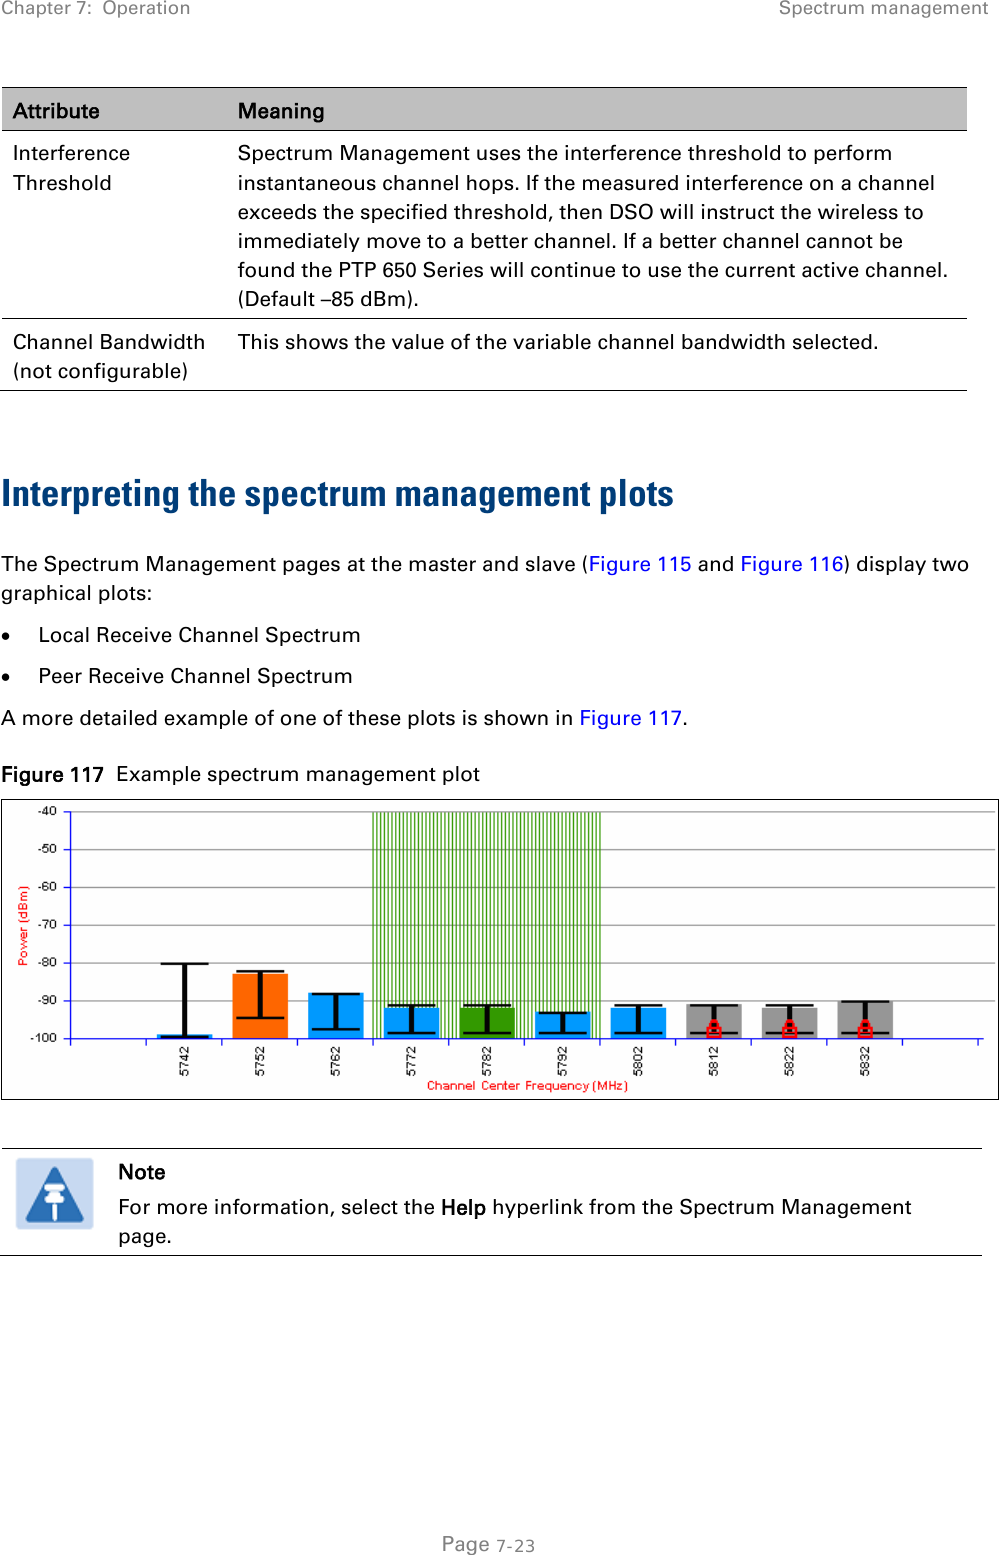 Chapter 7:  Operation Spectrum management  Attribute Meaning Interference Threshold Spectrum Management uses the interference threshold to perform instantaneous channel hops. If the measured interference on a channel exceeds the specified threshold, then DSO will instruct the wireless to immediately move to a better channel. If a better channel cannot be found the PTP 650 Series will continue to use the current active channel. (Default –85 dBm). Channel Bandwidth (not configurable) This shows the value of the variable channel bandwidth selected.  Interpreting the spectrum management plots The Spectrum Management pages at the master and slave (Figure 115 and Figure 116) display two graphical plots: • Local Receive Channel Spectrum • Peer Receive Channel Spectrum A more detailed example of one of these plots is shown in Figure 117.  Figure 117  Example spectrum management plot    Note For more information, select the Help hyperlink from the Spectrum Management page.   Page 7-23 